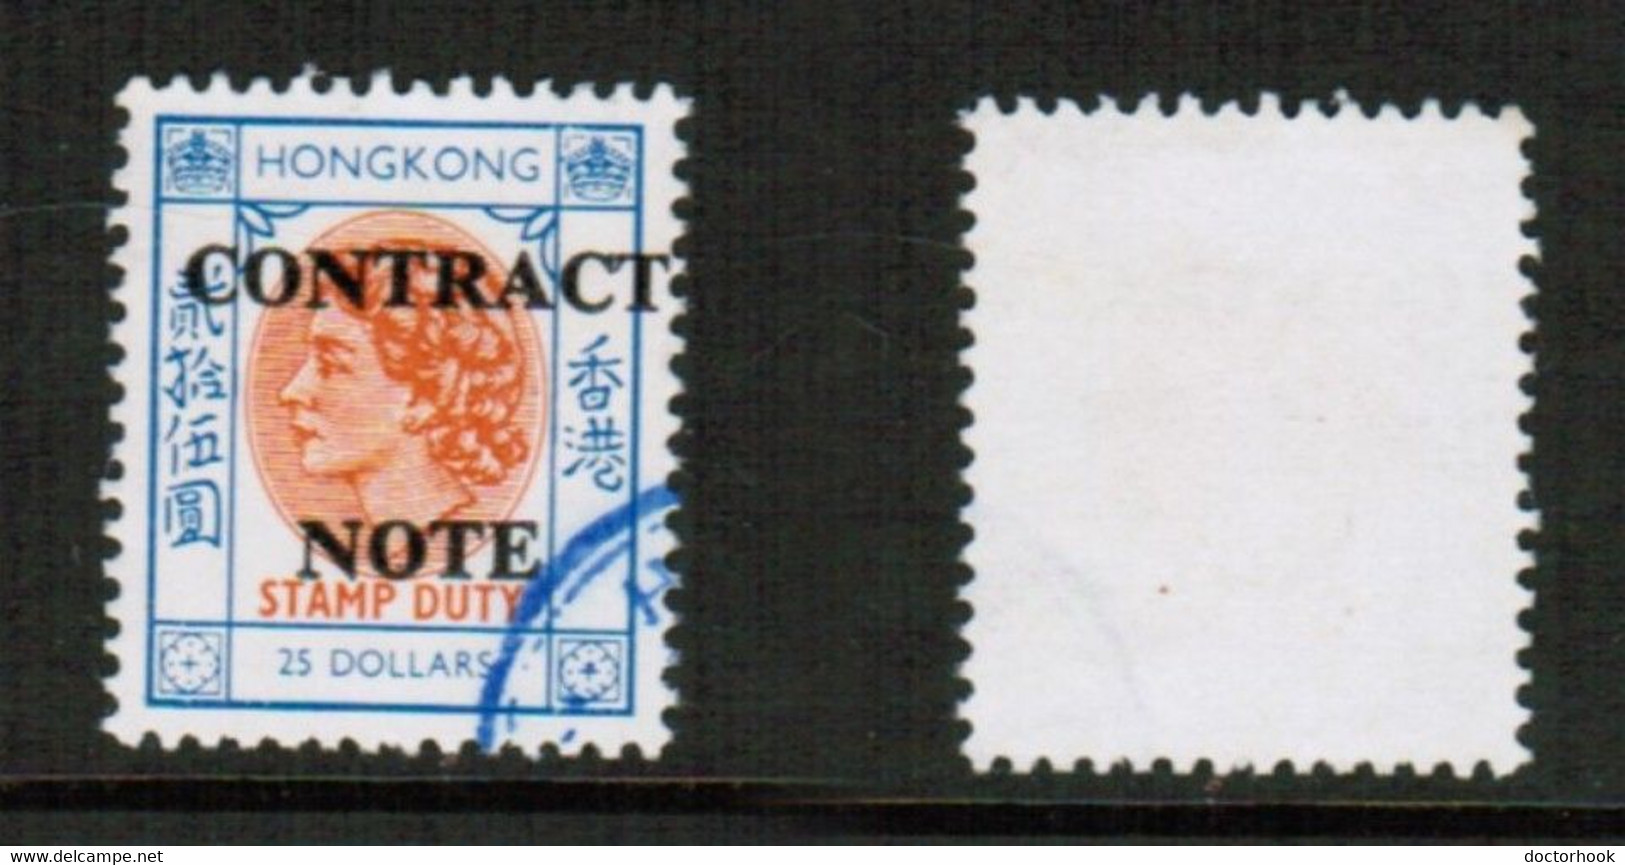 HONG KONG   $25.00 DOLLAR CONTRACT NOTE FISCAL USED (CONDITION AS PER SCAN) (Stamp Scan # 829-2) - Francobollo Fiscali Postali